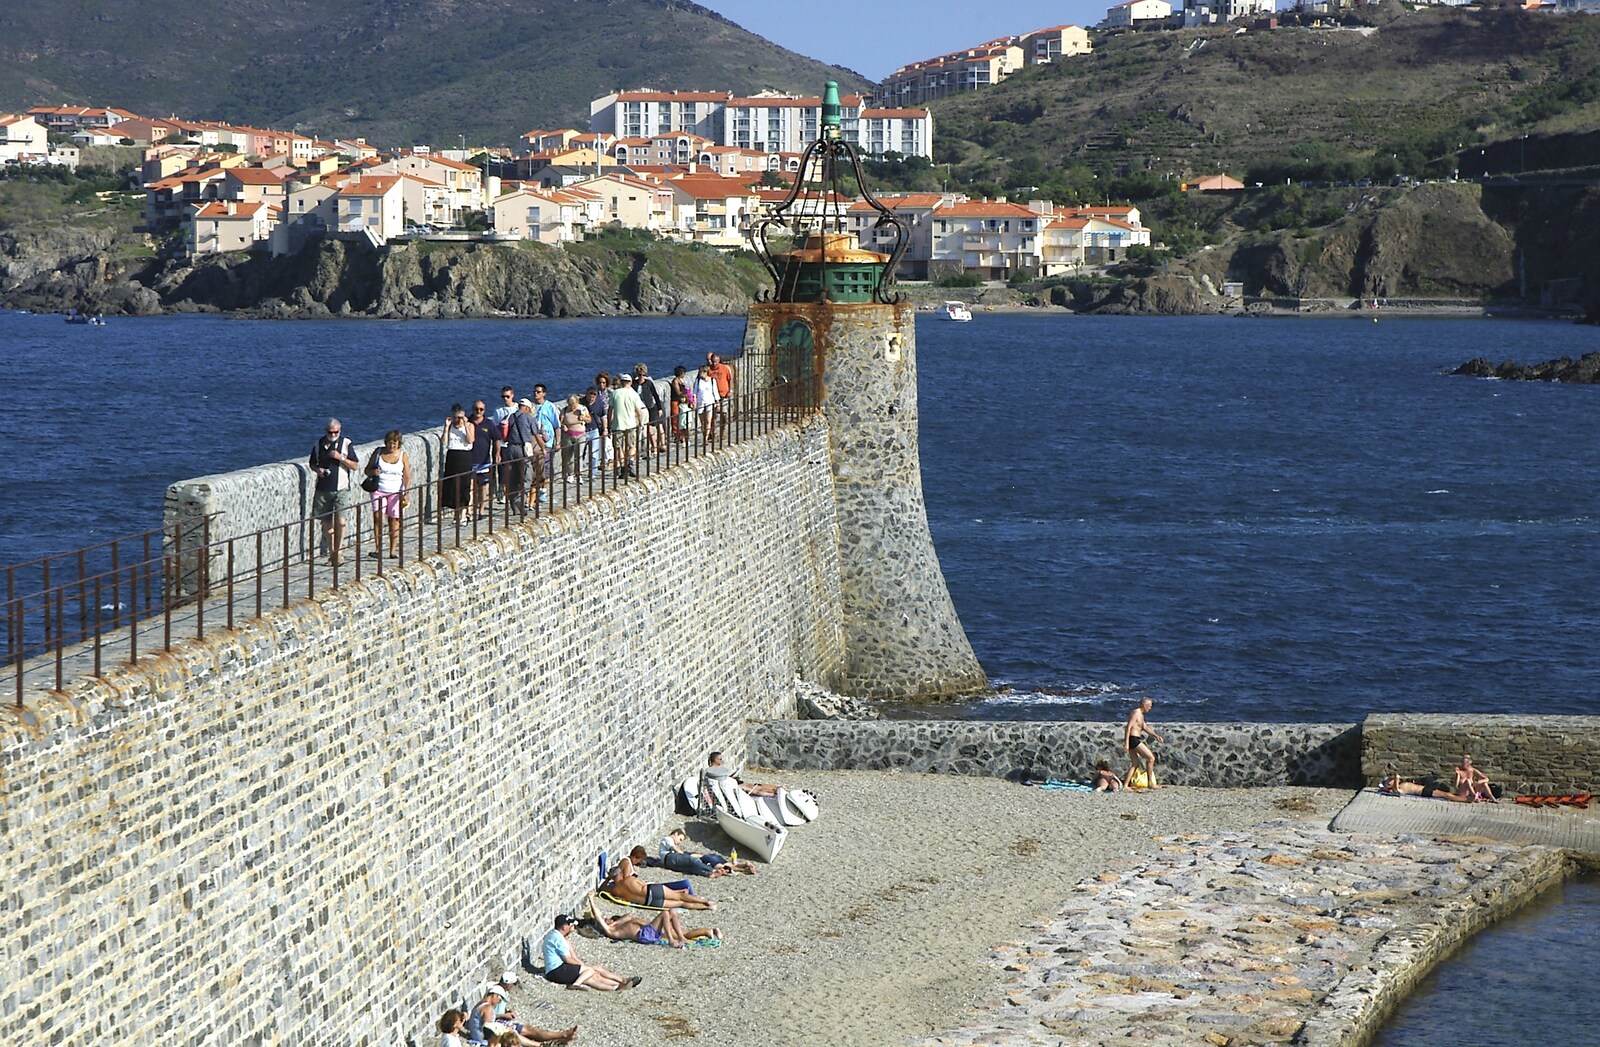 The harbour wall from The Colourful Boats of Collioure, France - 20th September 2006